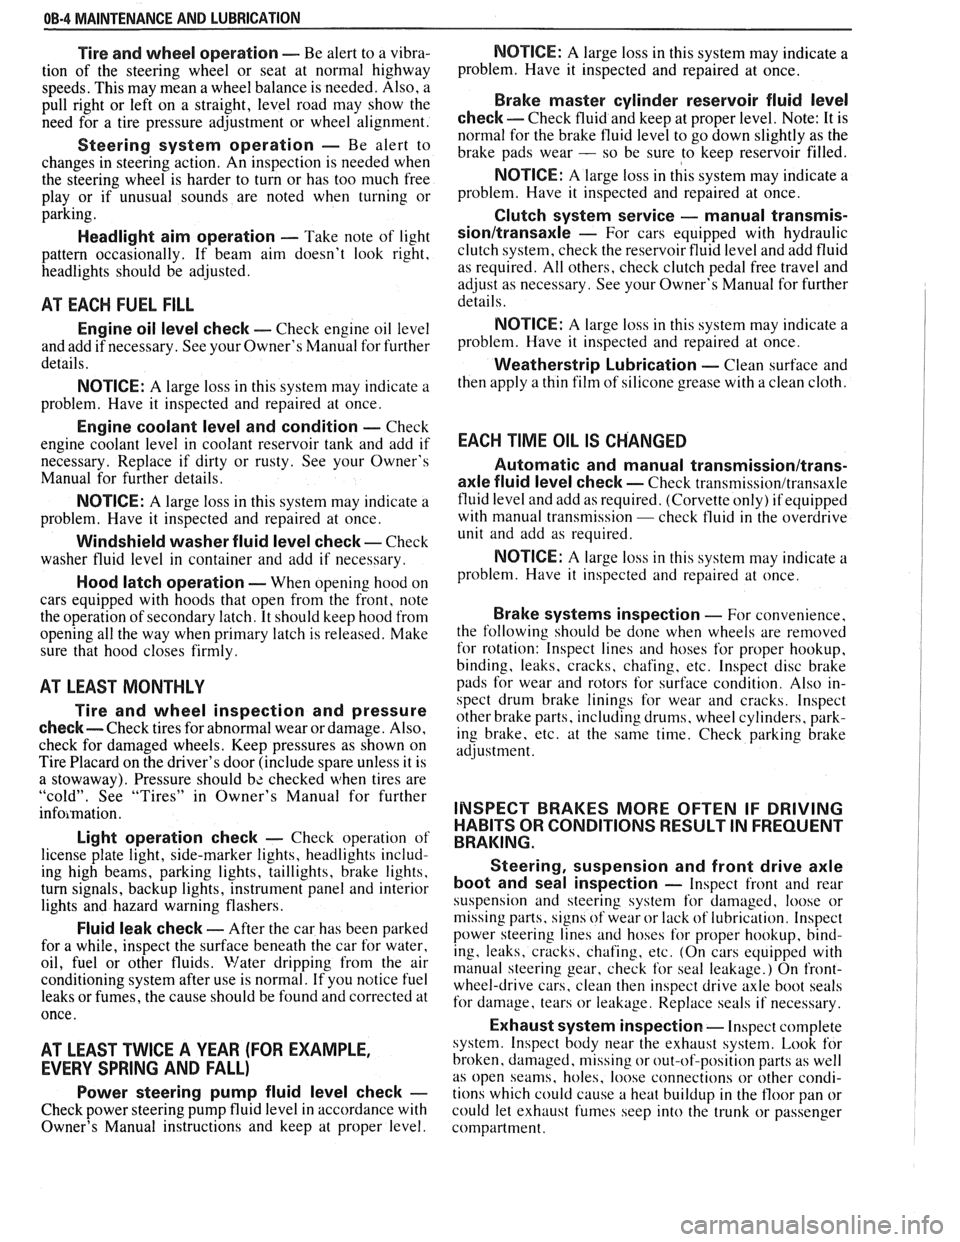 PONTIAC FIERO 1988  Service Owners Manual 
OB-4 MAINTENANCE AND LUBRICATION 
Tire and  wheel operation - Be alert to  a vibra- 
tion  of  the steering  wheel  or seat  at  normal  highway 
speeds. This may mean a  wheel balance  is needed. Al